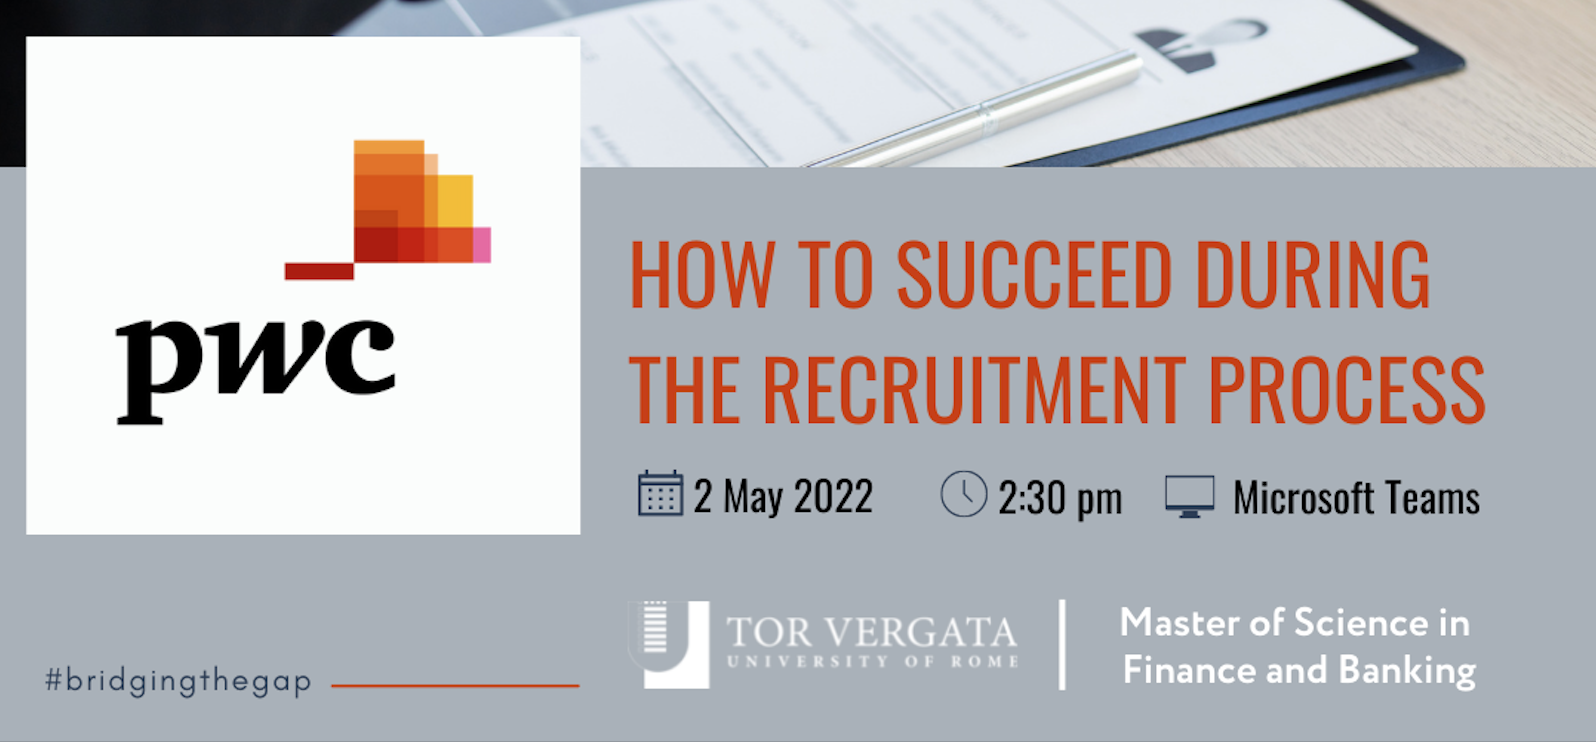 HOW TO SUCCEED DURING THE RECRUITMENT PROCESS